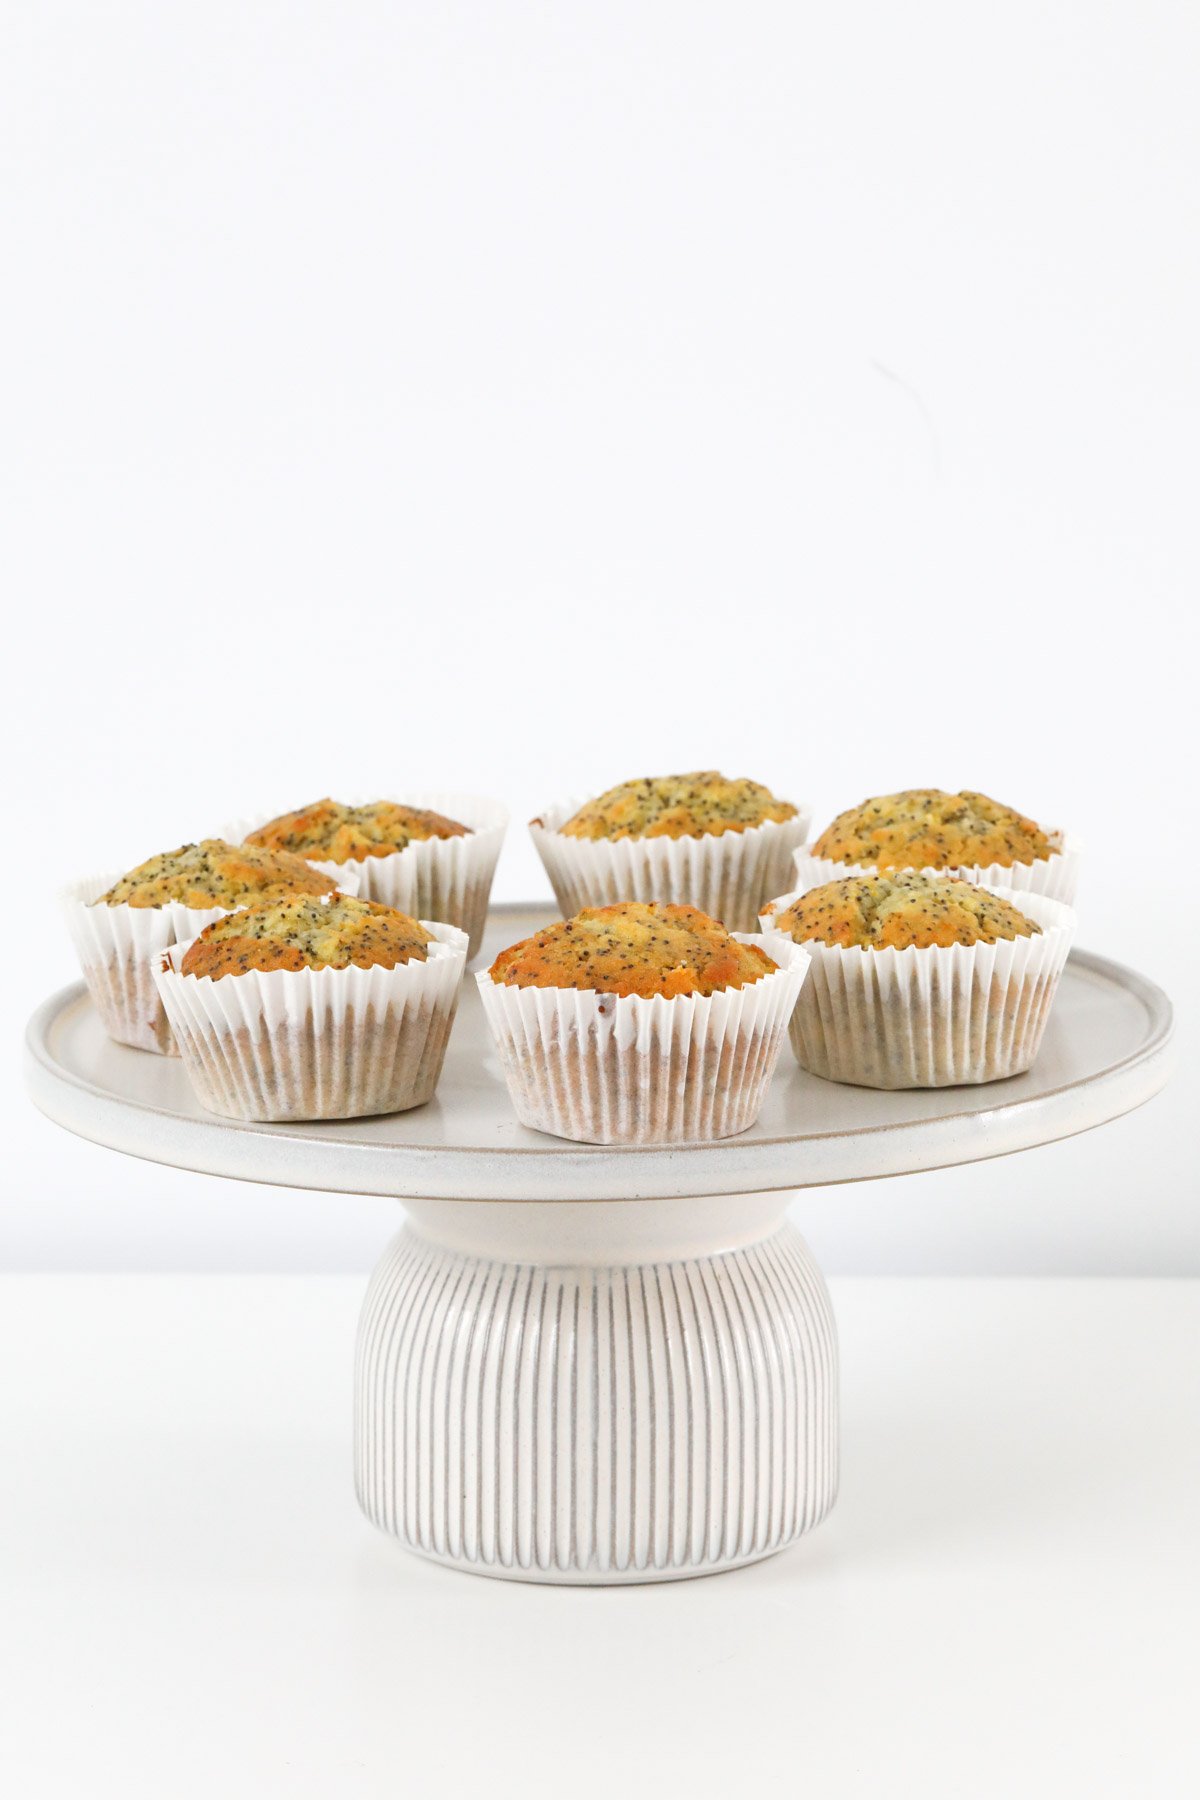 A chunky-based white cake stand with six orange & poppyseed muffins arranged on it